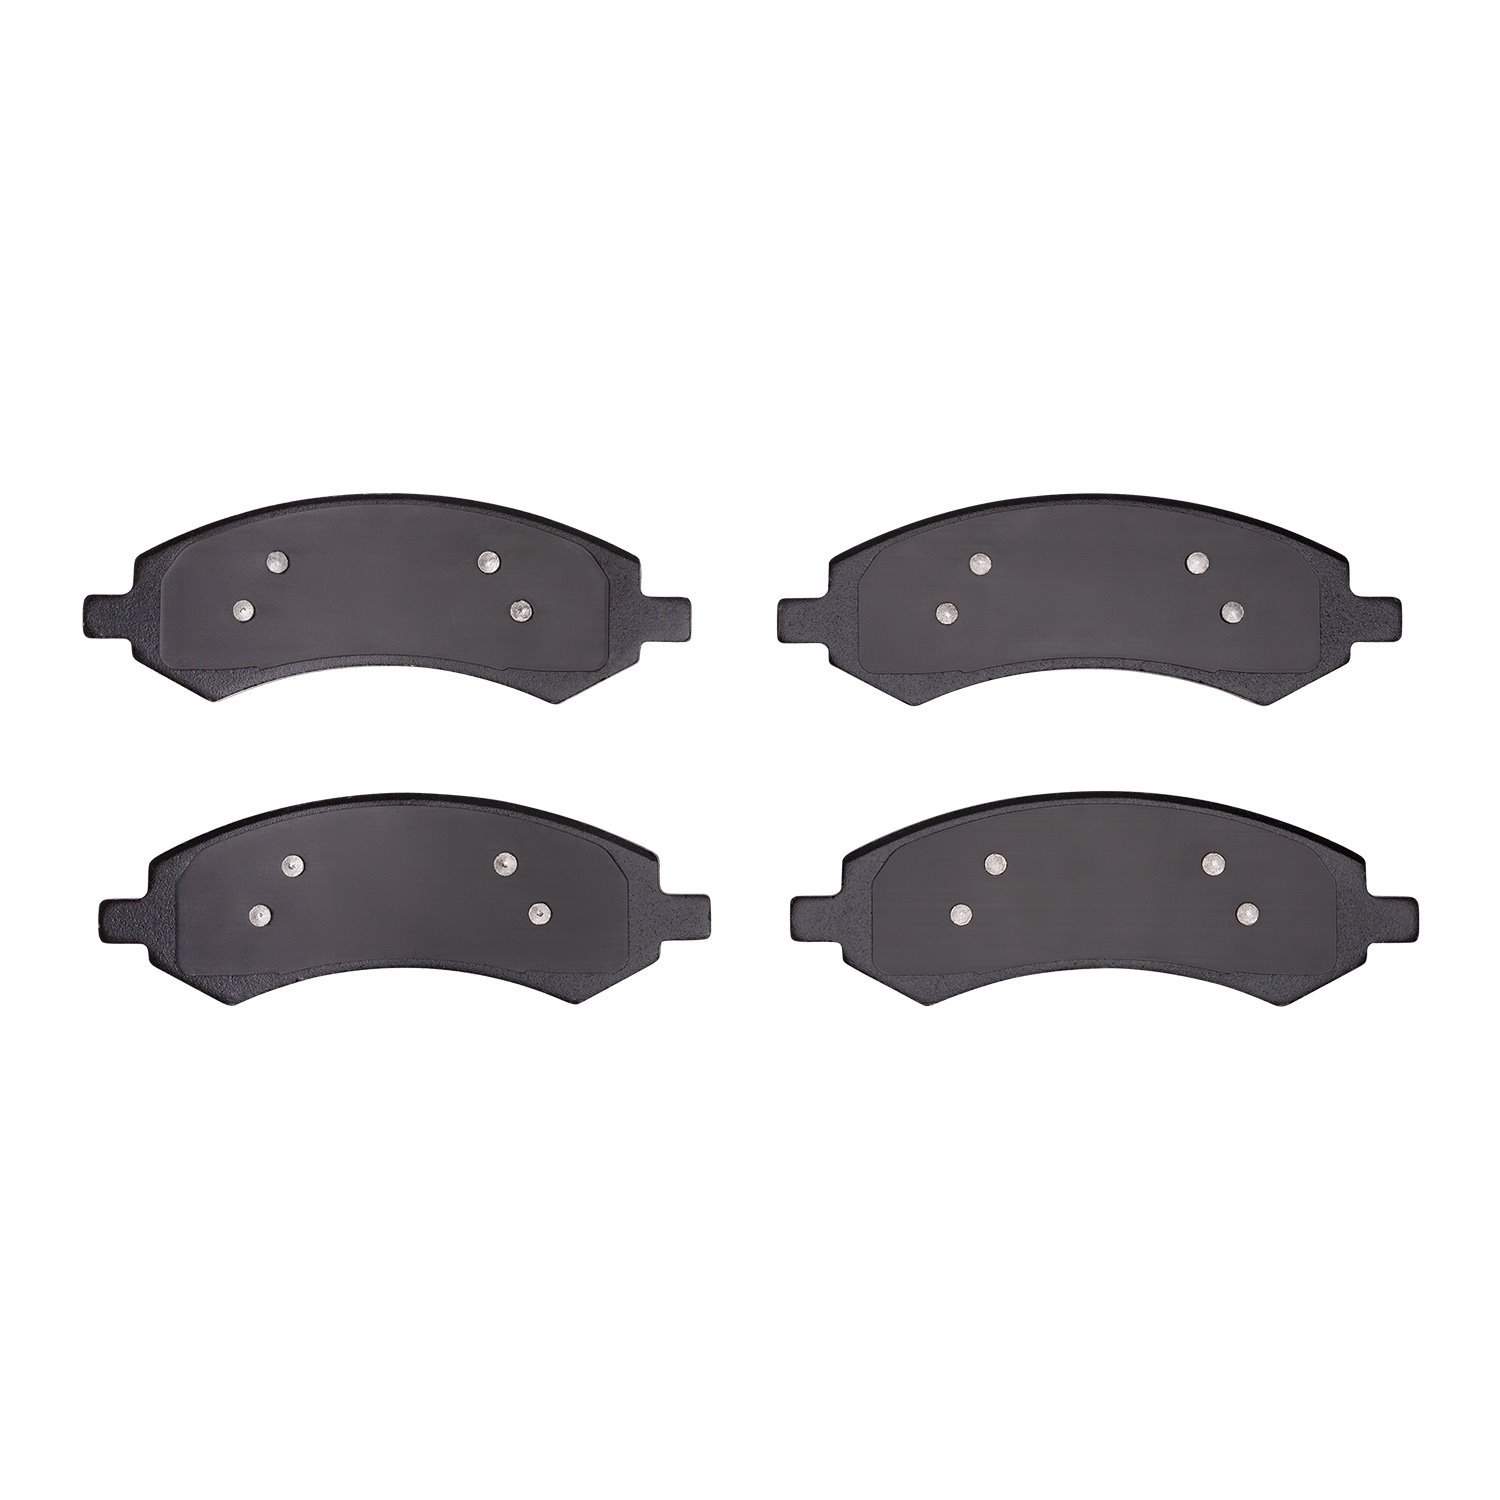 1310-1084-00 3000-Series Ceramic Brake Pads, Fits Select Multiple Makes/Models, Position: Front